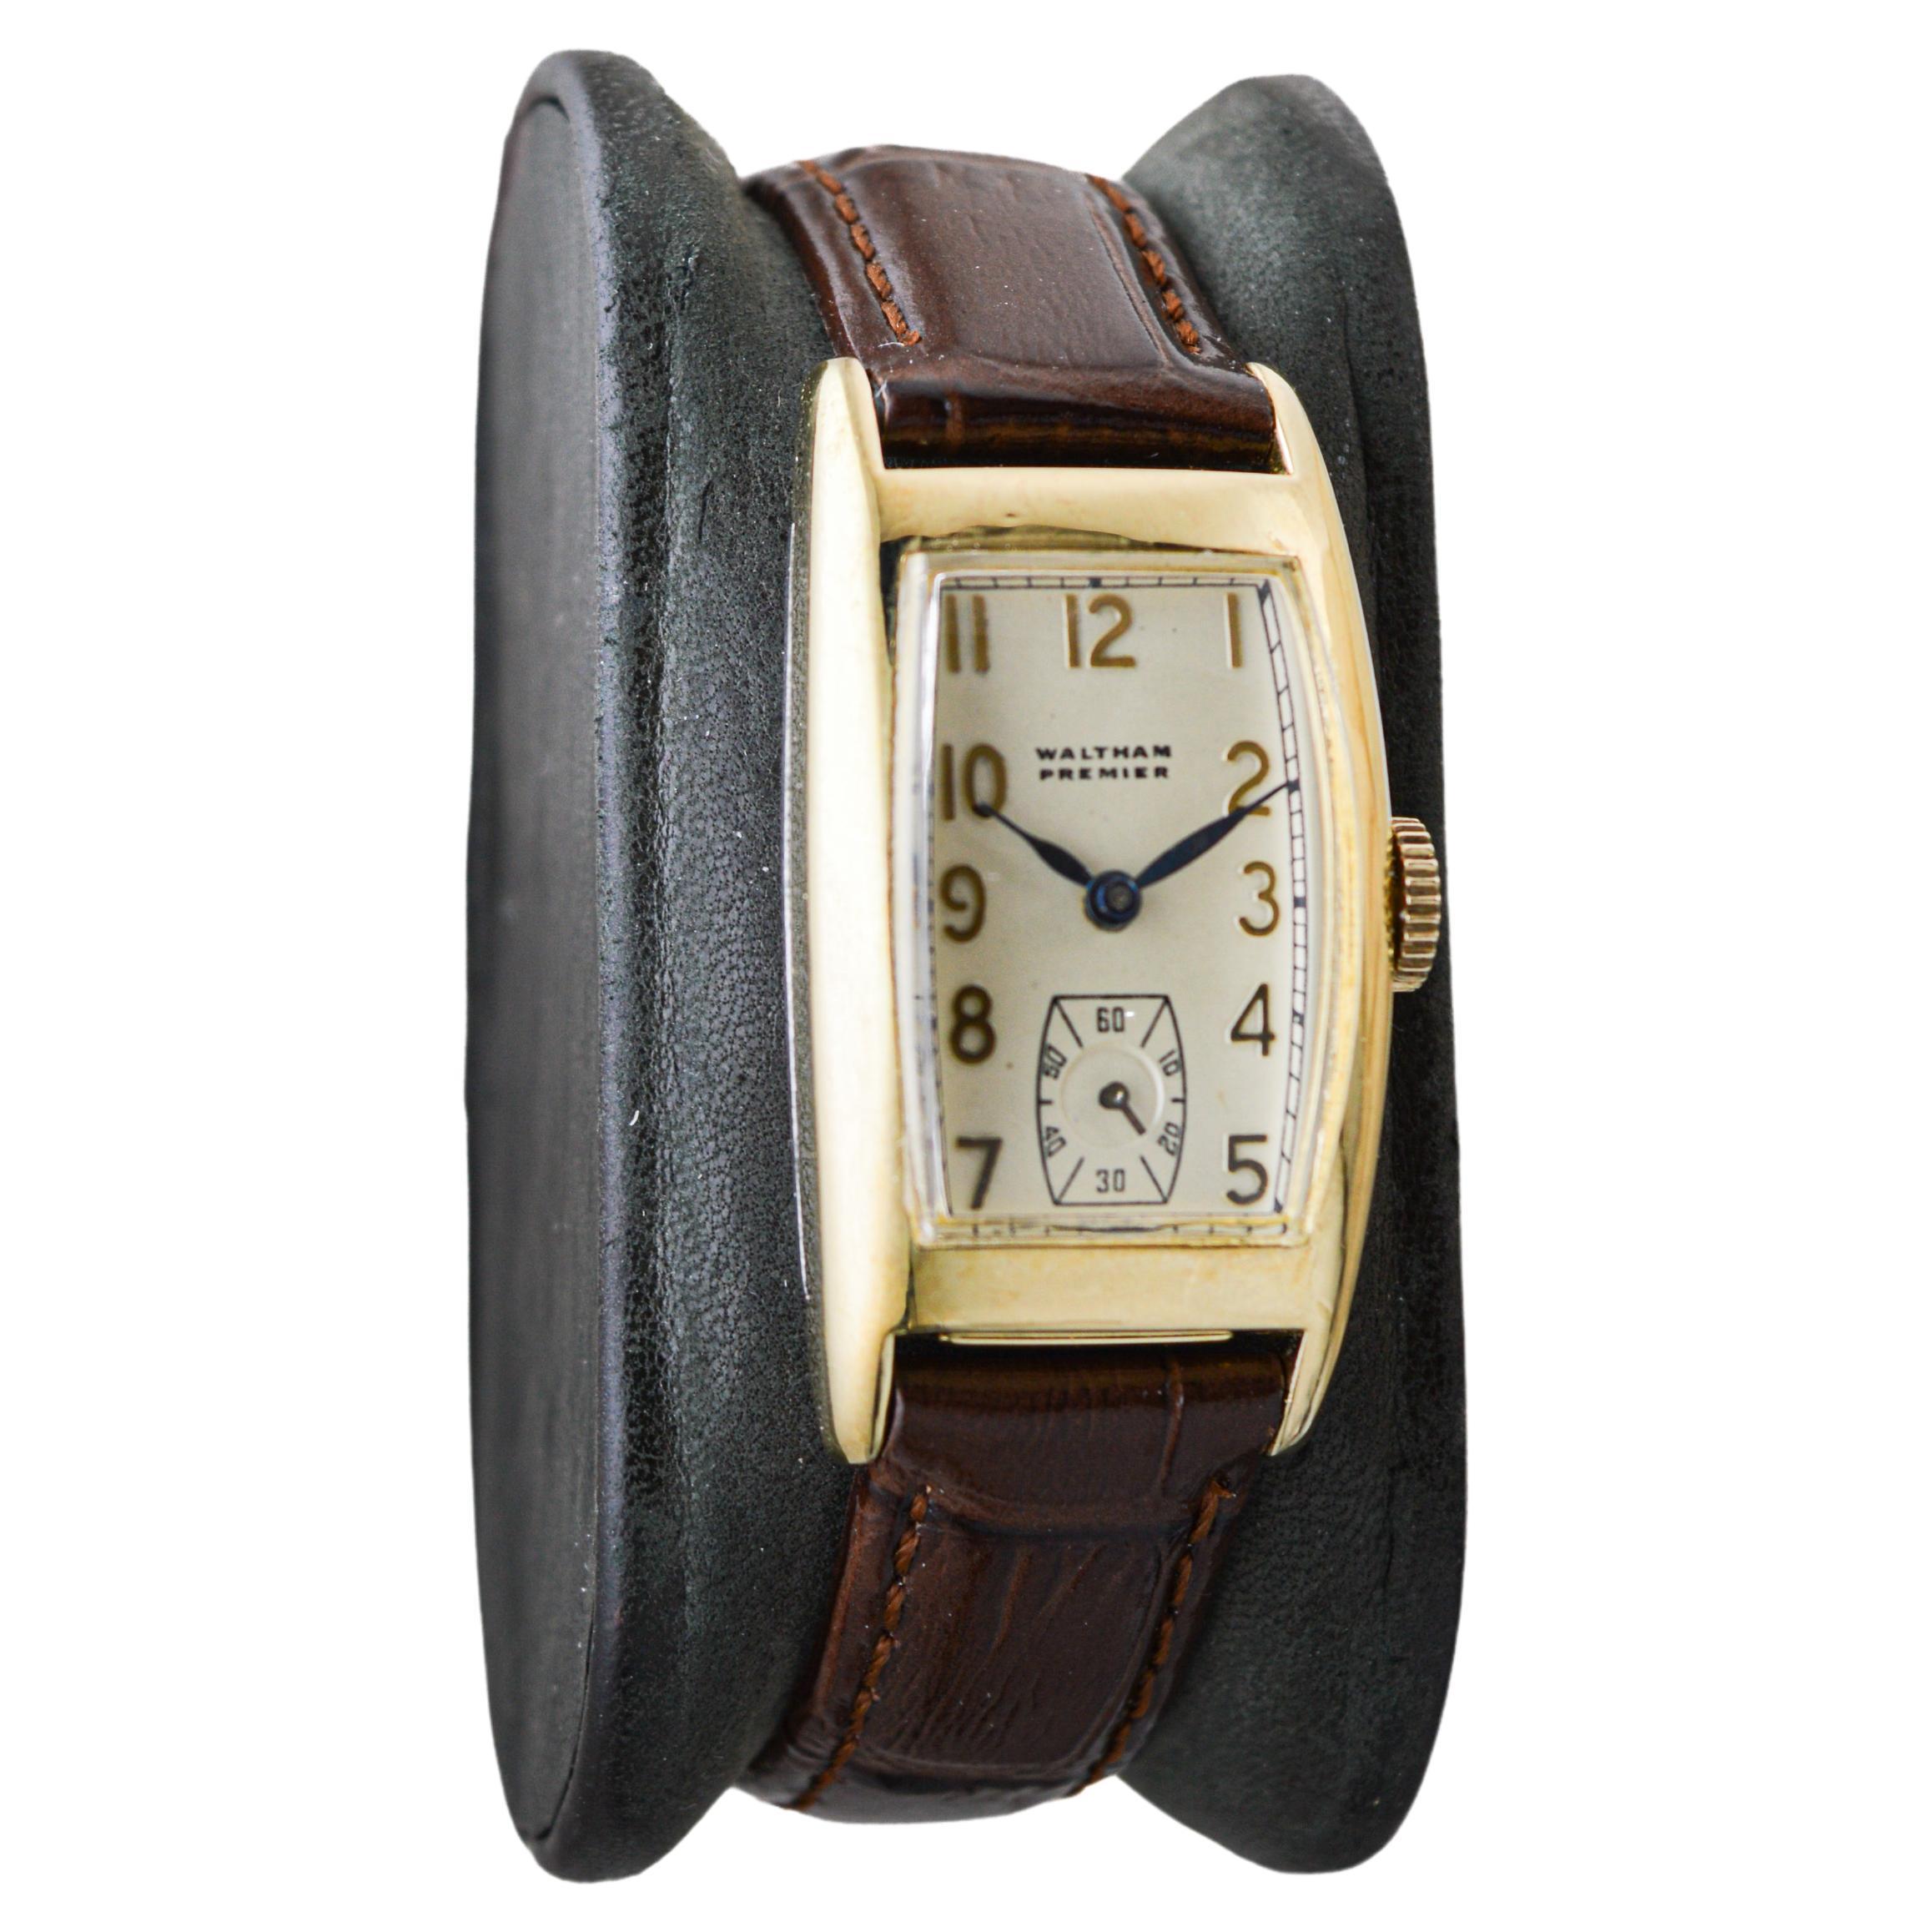 FACTORY / HOUSE: Waltham Watch Company
STYLE / REFERENCE: Art Deco / Premier
METAL / MATERIAL: Yellow Gold Filled
CIRCA / YEAR: 1940's
DIMENSIONS / SIZE: Length 39mm X Diameter 21mm
MOVEMENT / CALIBER: Manual Winding / 9 Jewels / Caliber 740